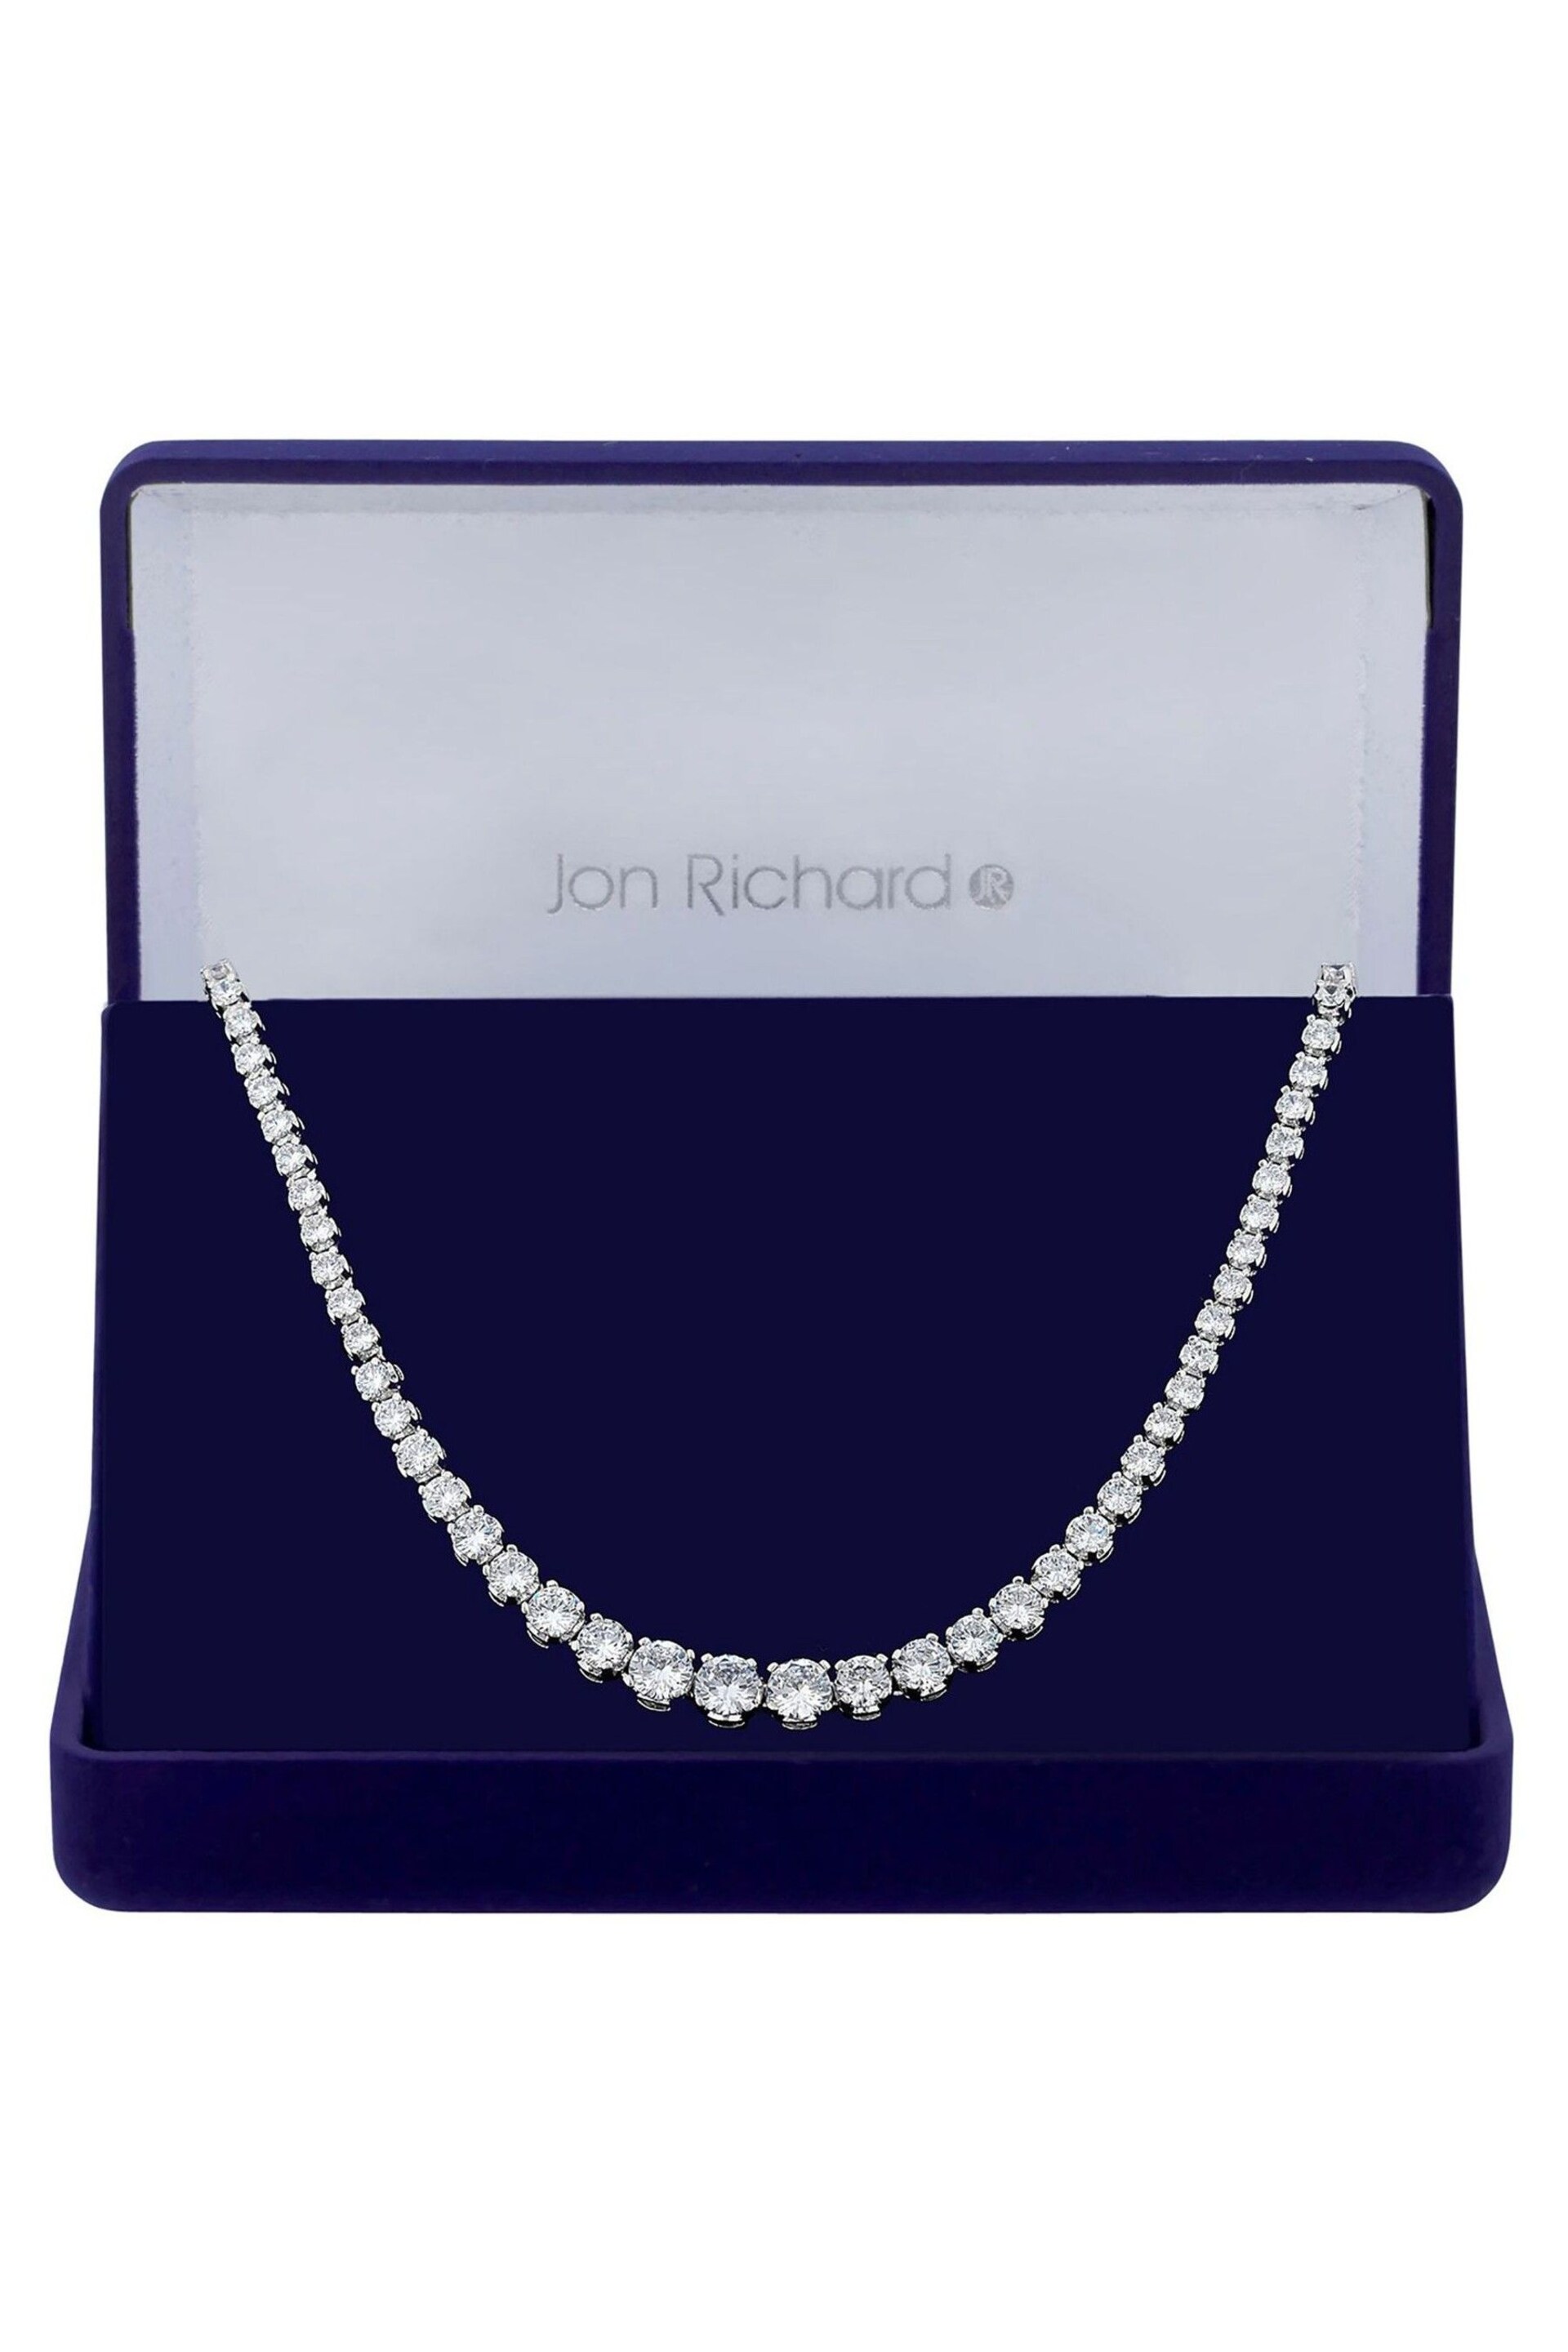 Jon Richard Silver Cubic Zirconia Graduated Tennis Necklace in a Gift Box - Image 2 of 2